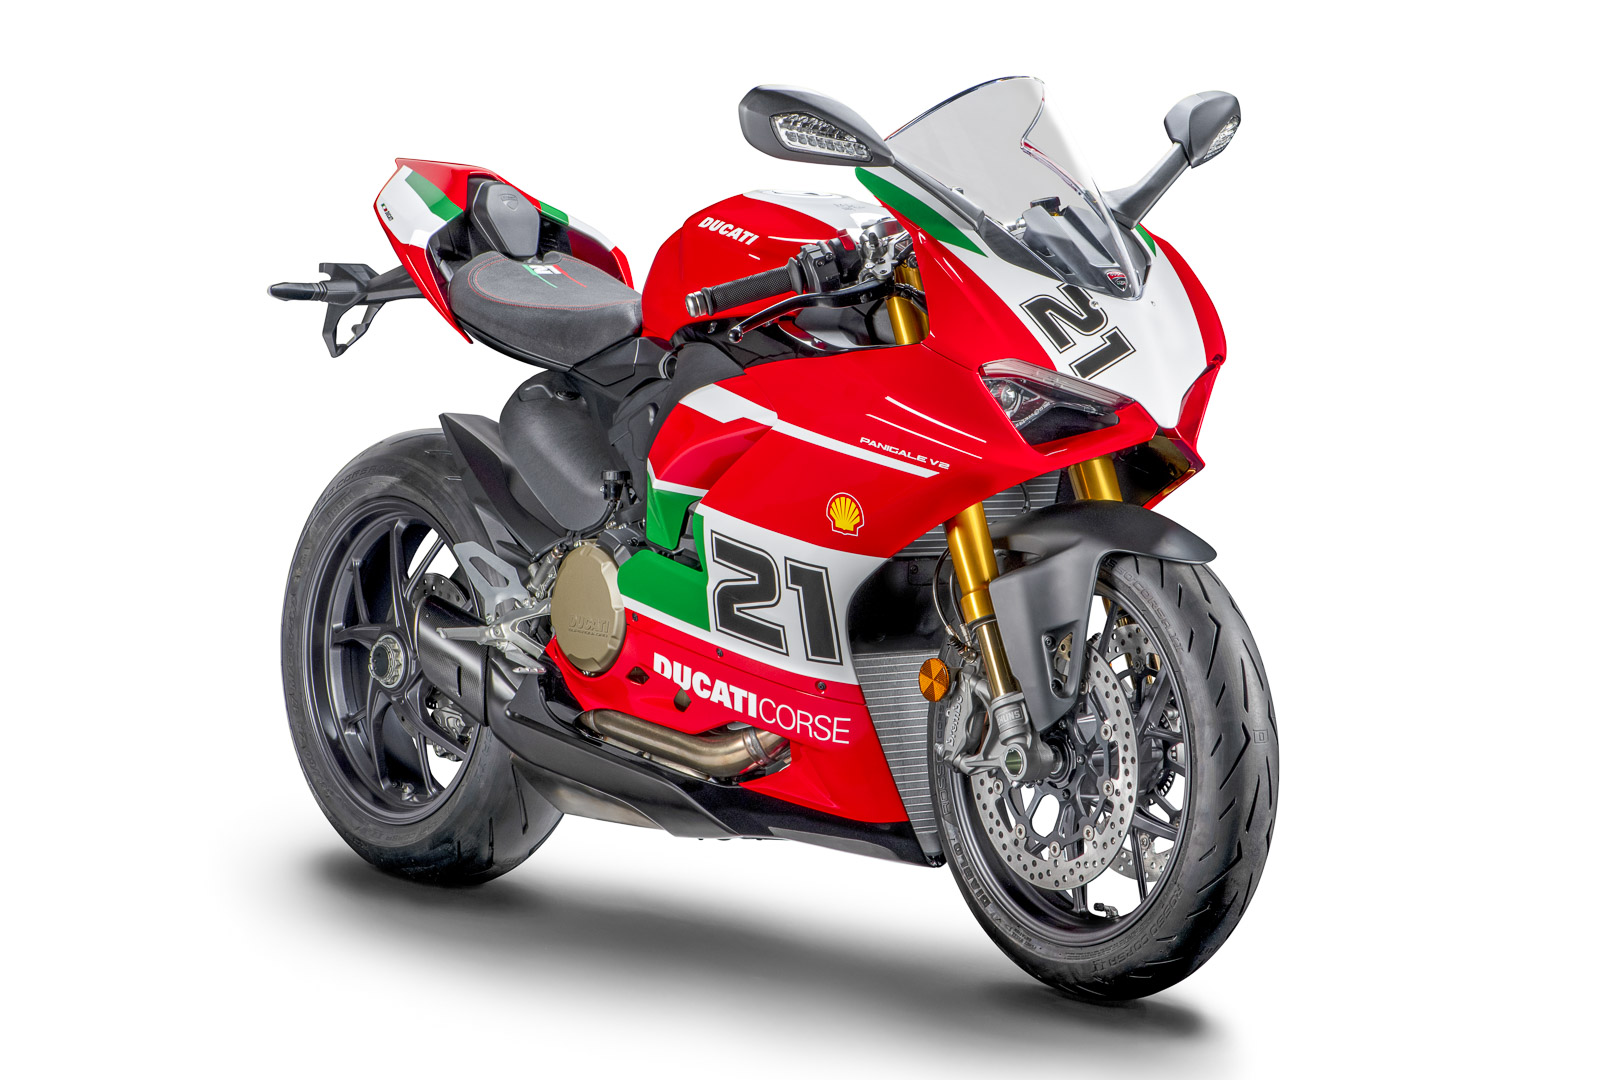 Panigale V2 (inc early Panigale's)